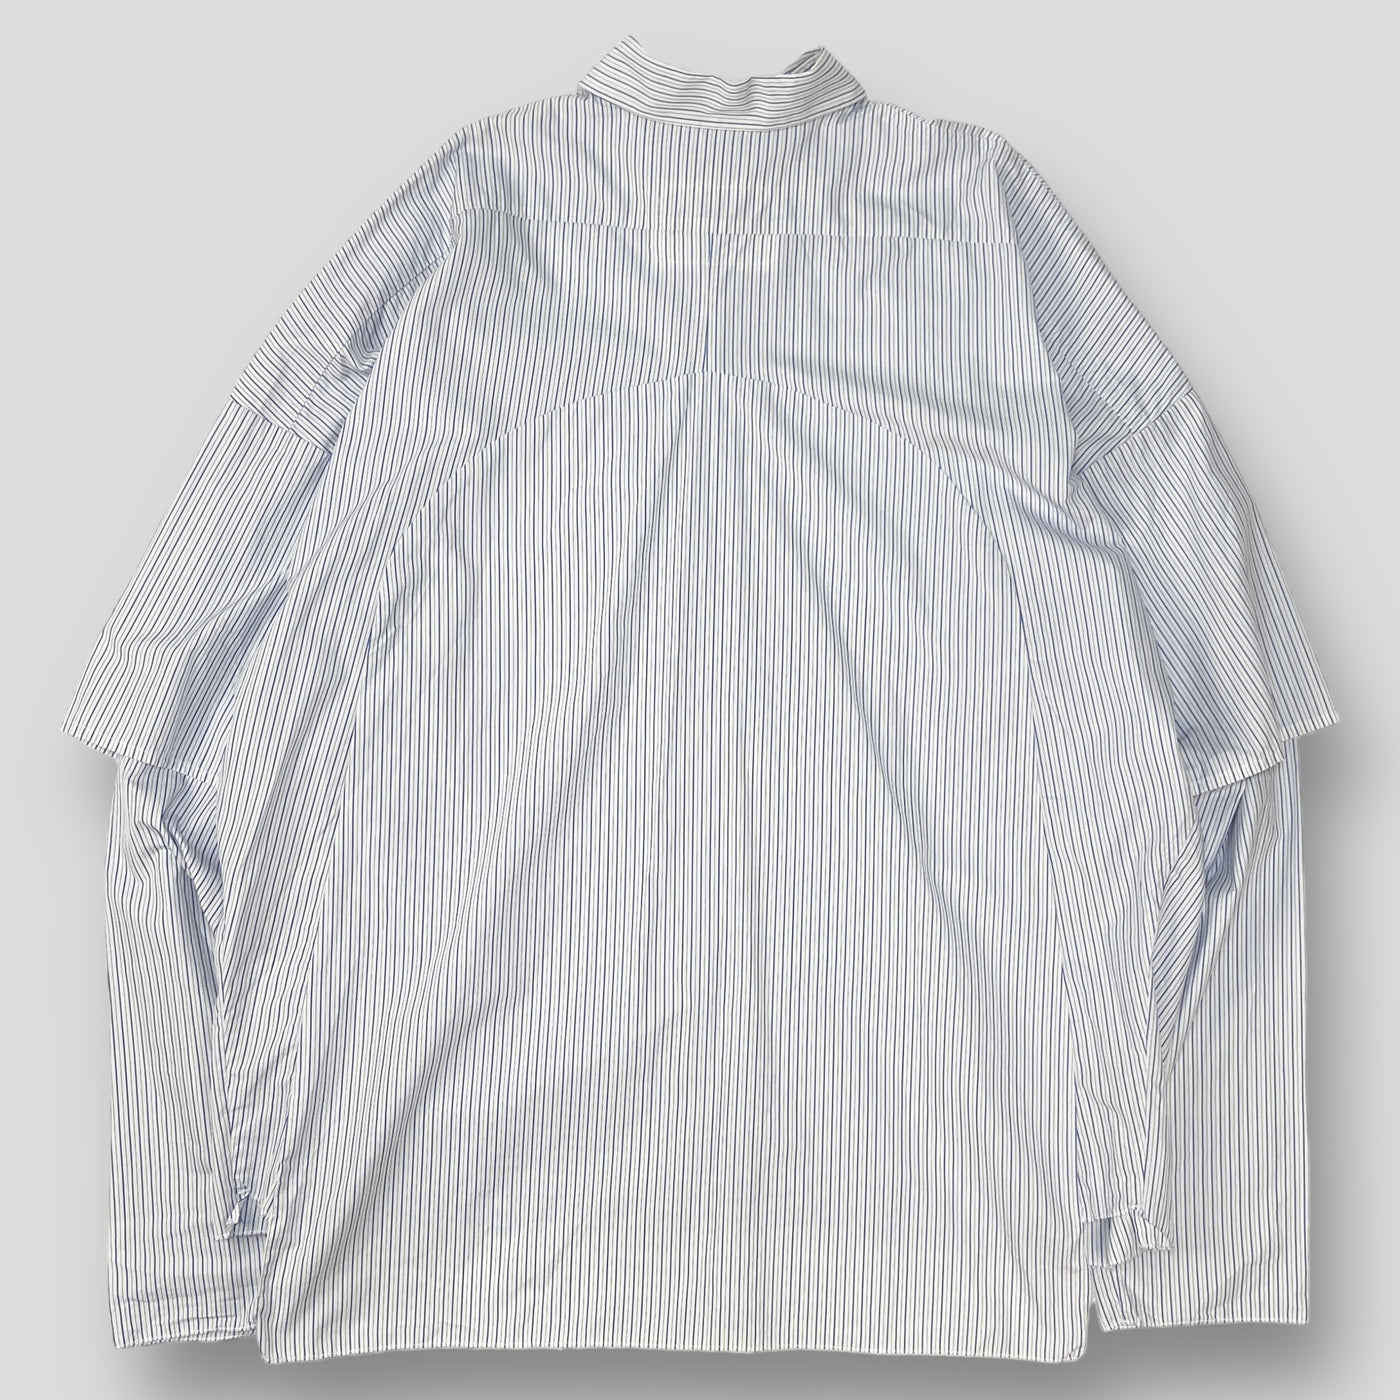 2020SS layered double sleeve shirt 09.03.19. M